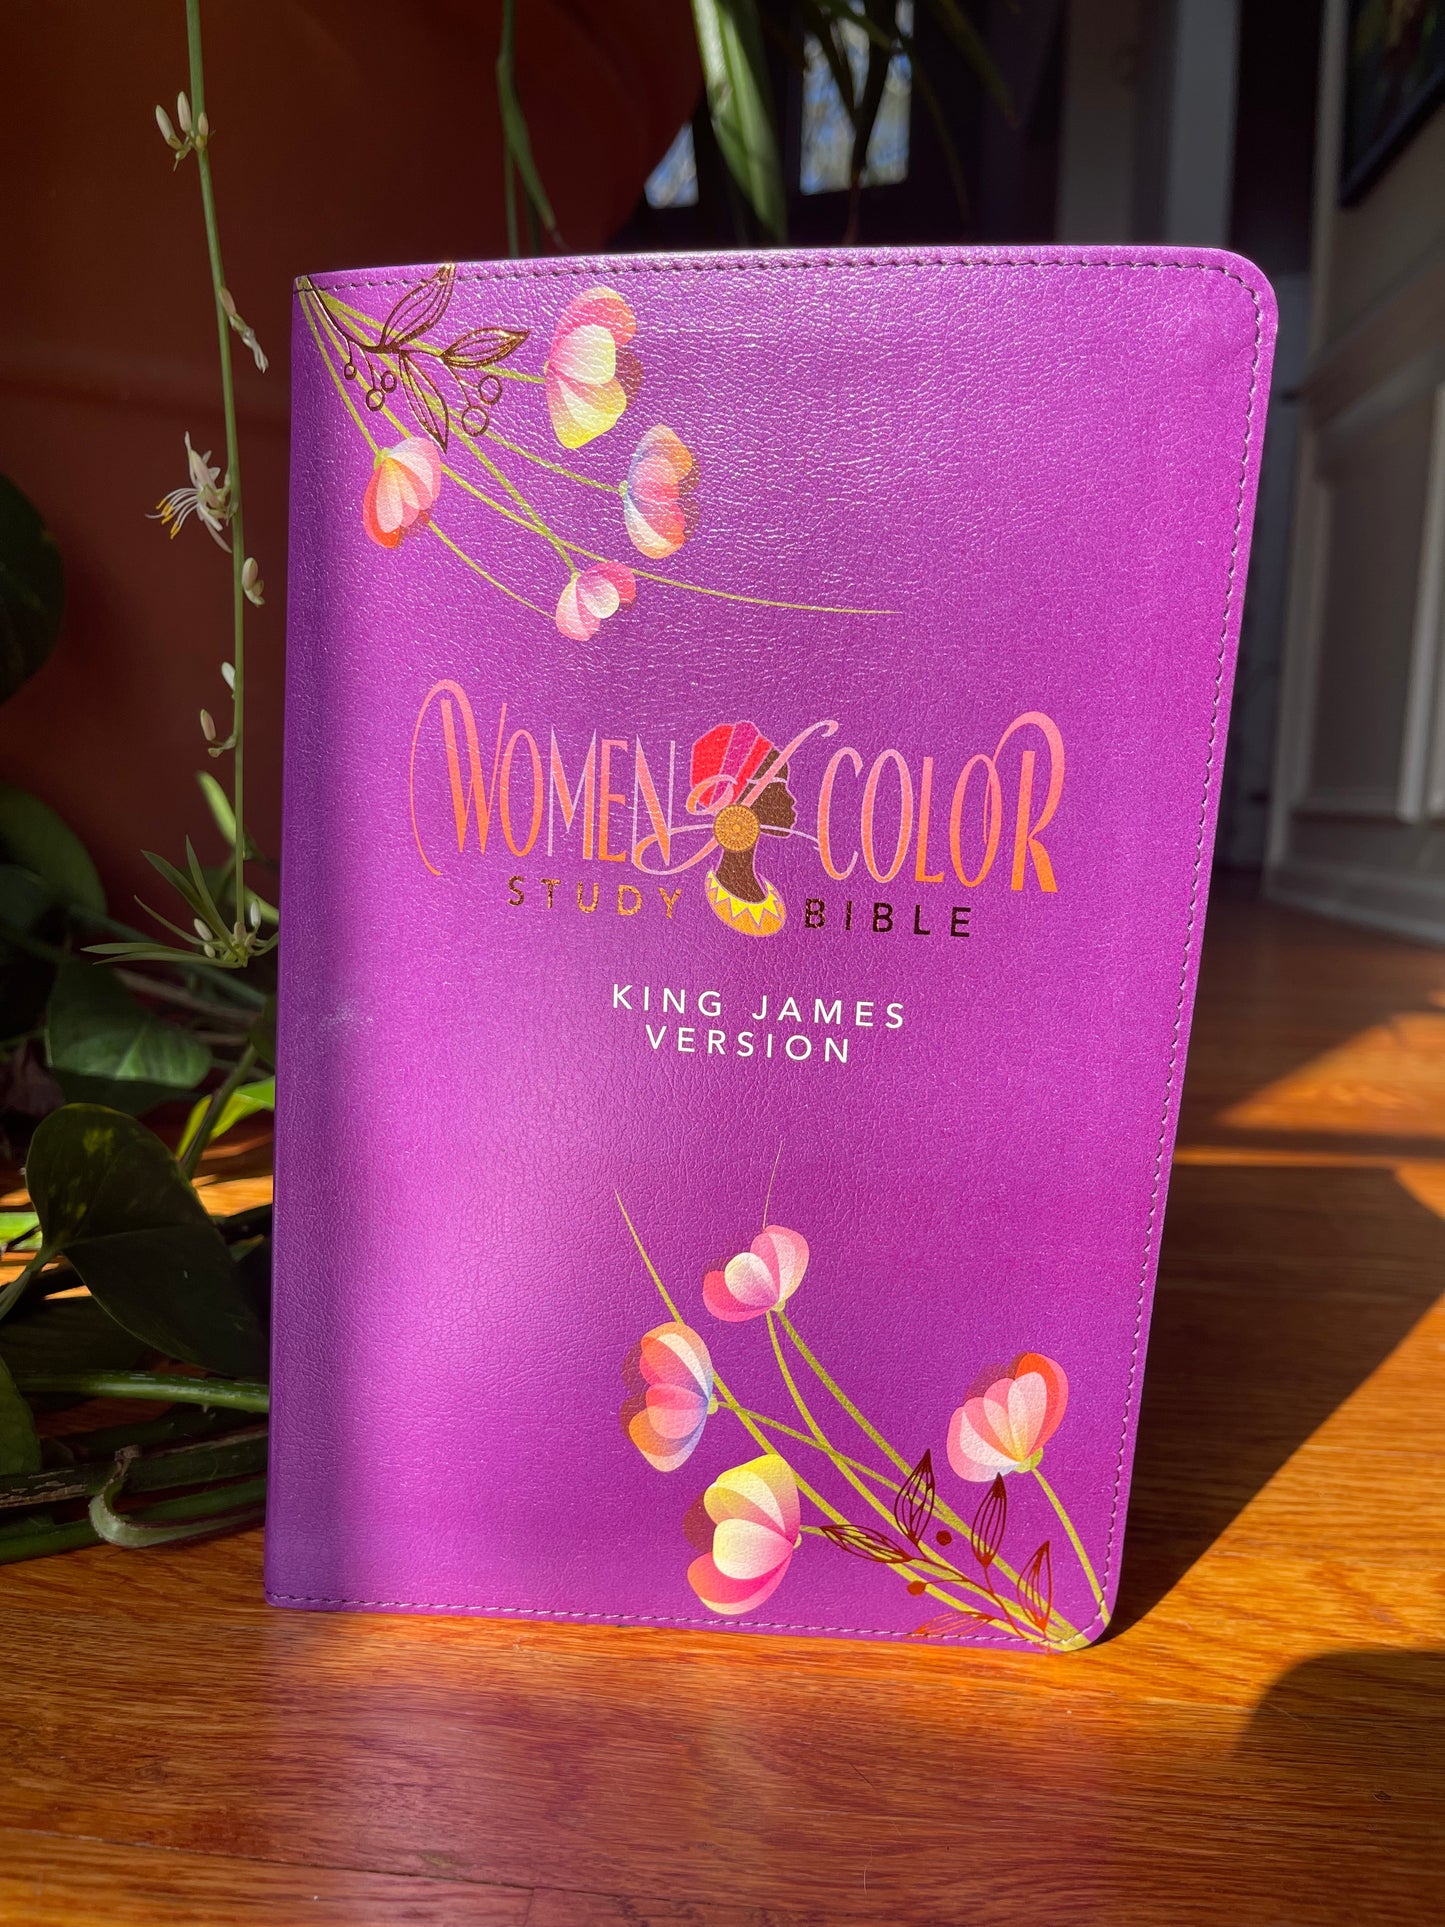 The New Women of Color Study Bible  Purple Luxleather Edition x 4